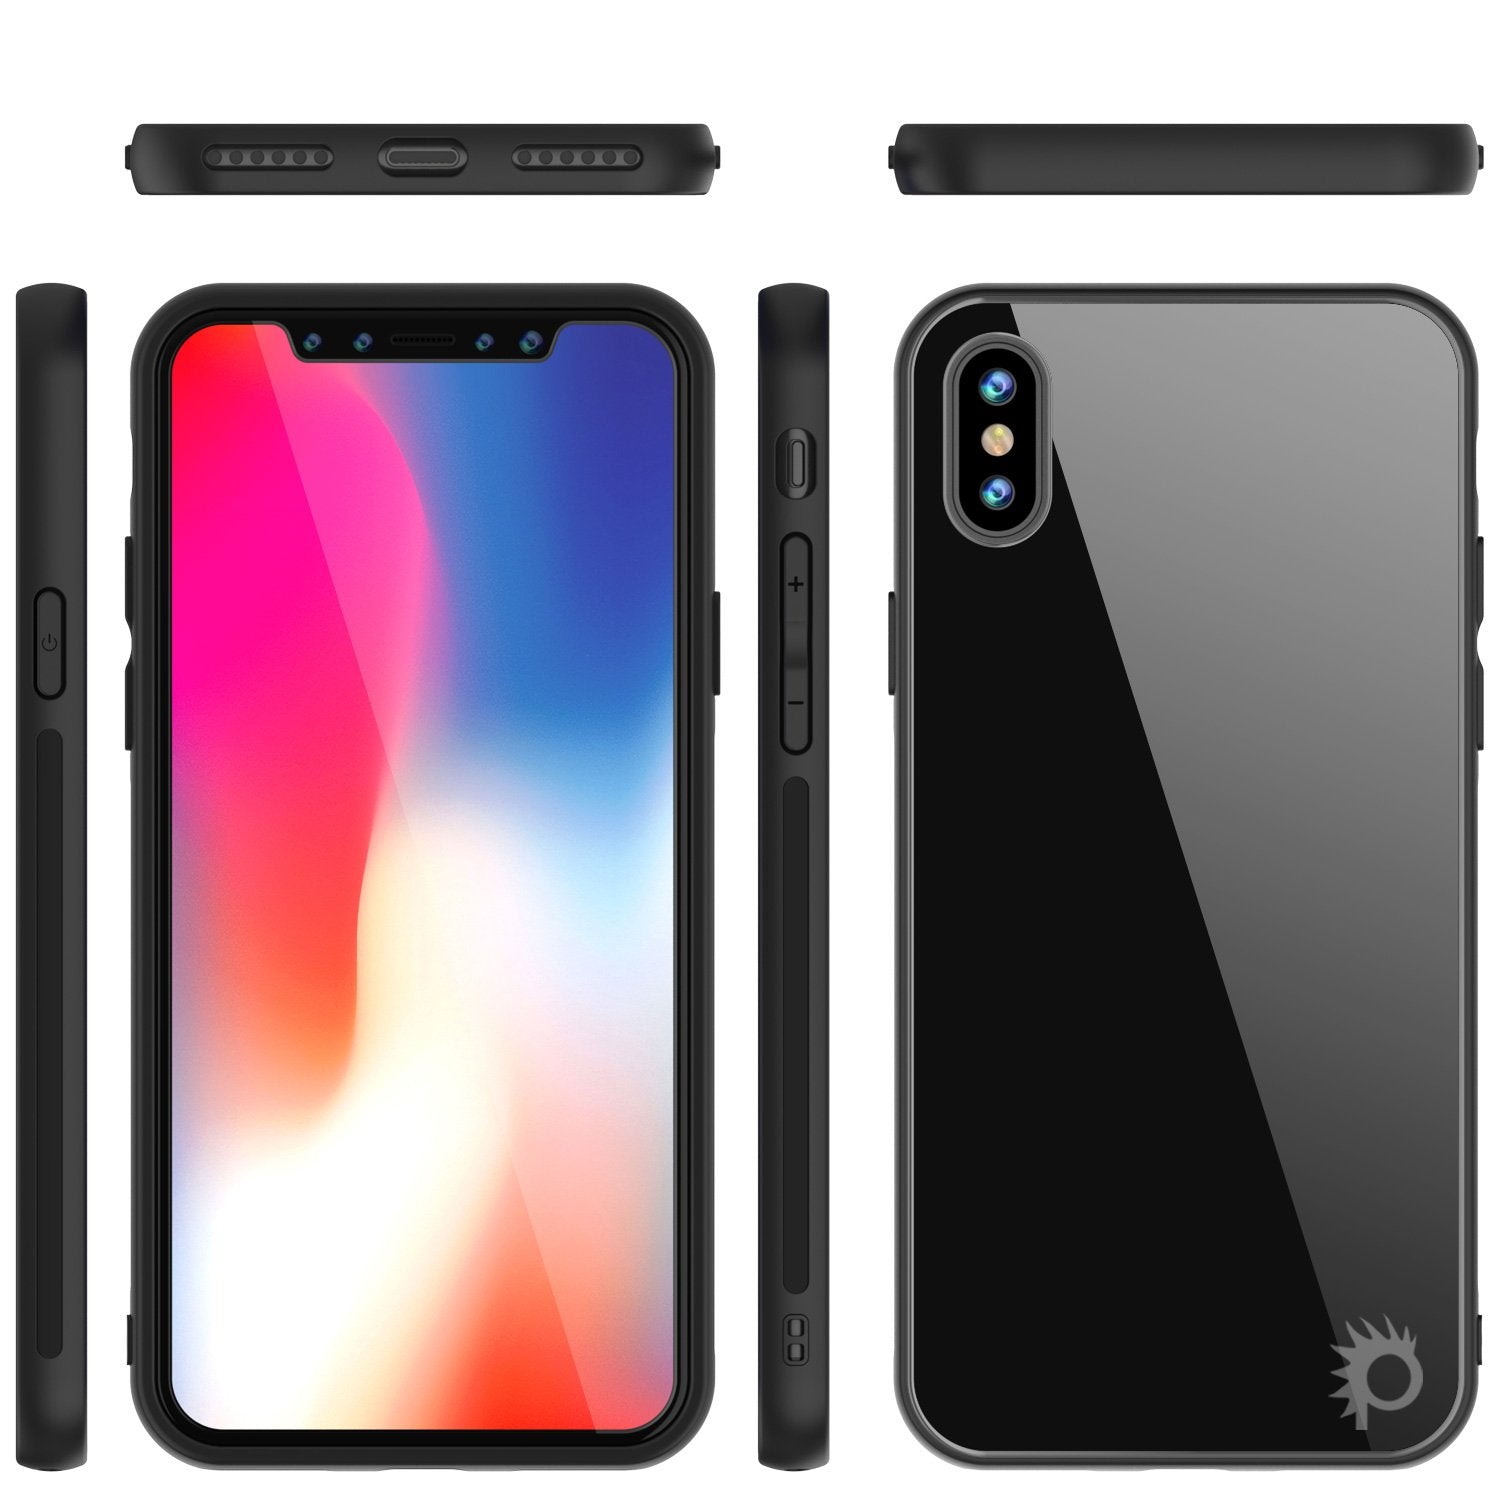 iPhone X Case, Punkcase GlassShield Ultra Thin Protective 9H Full Body Tempered Glass Cover W/ Drop Protection & Non Slip Grip for Apple iPhone 10 [Black]